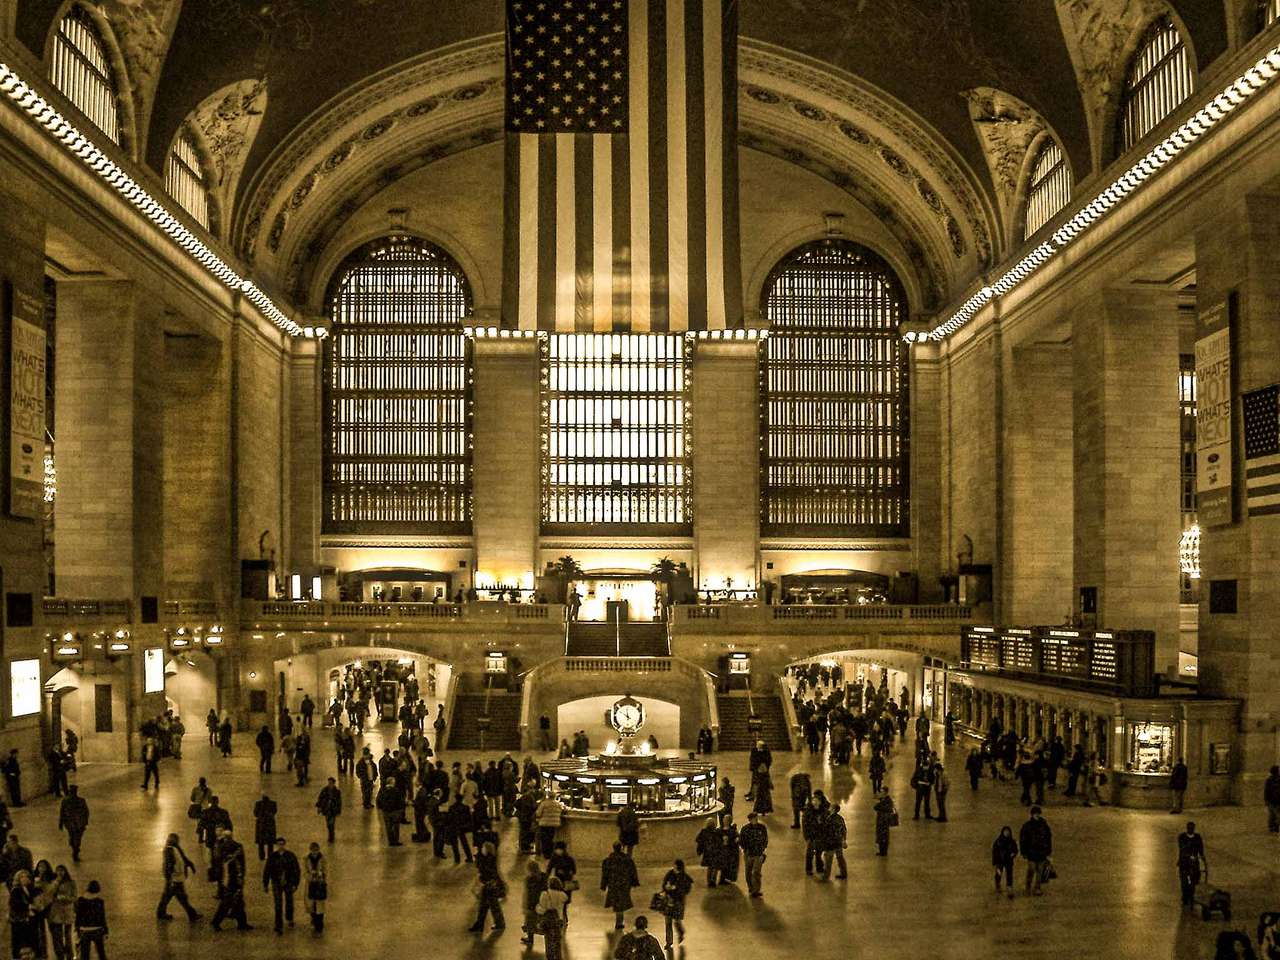 GRAND CENTRAL STATION - NY puzzle online